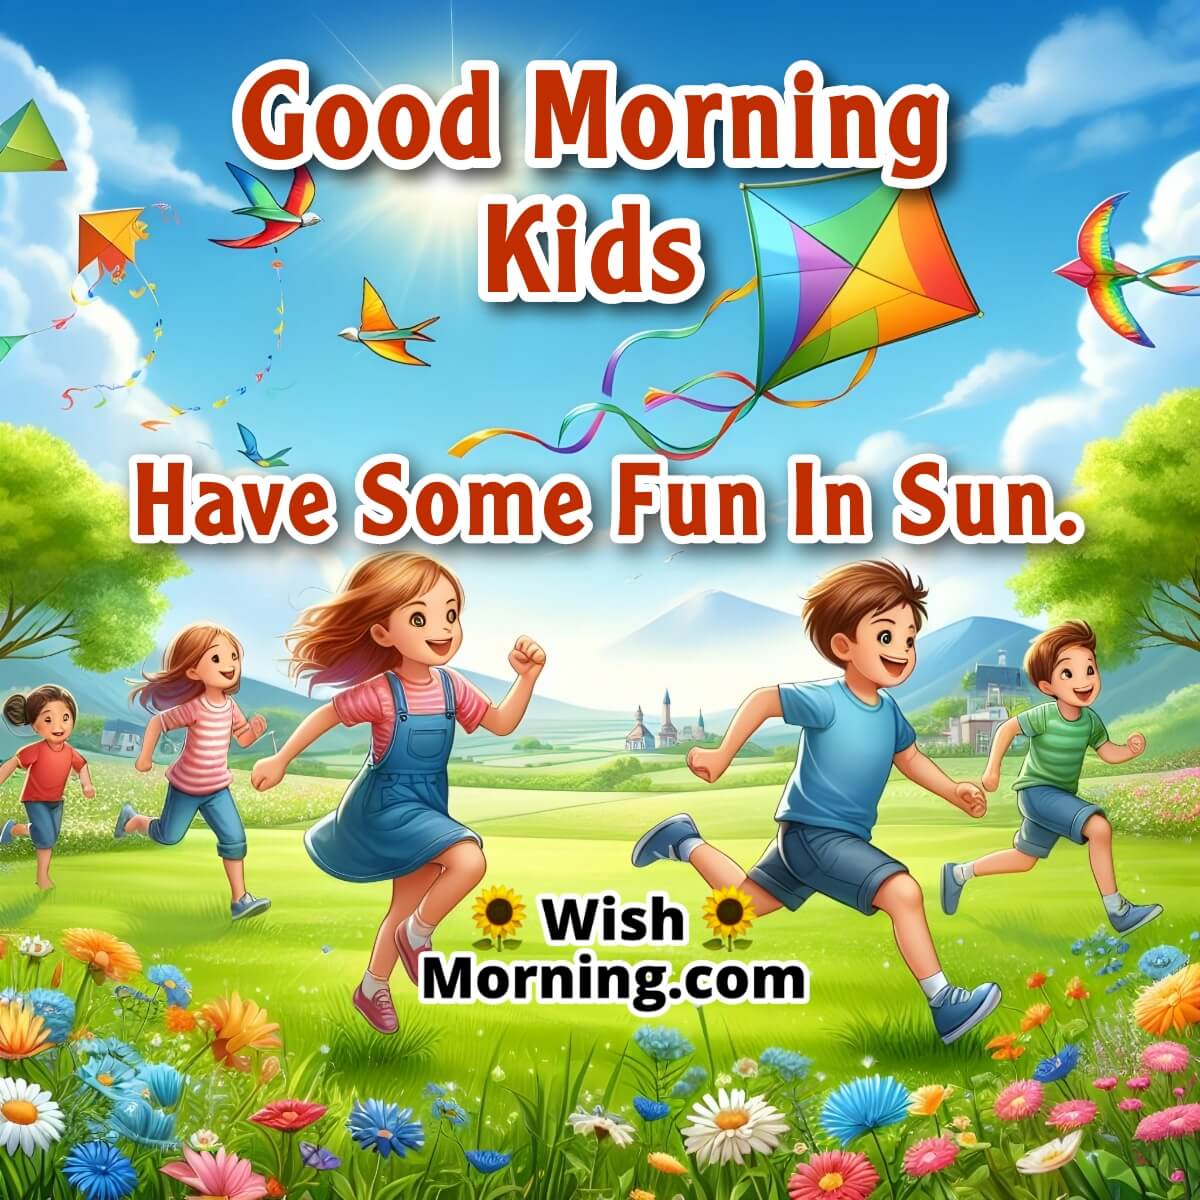 Good Morning Outdoor Playtime For Kids